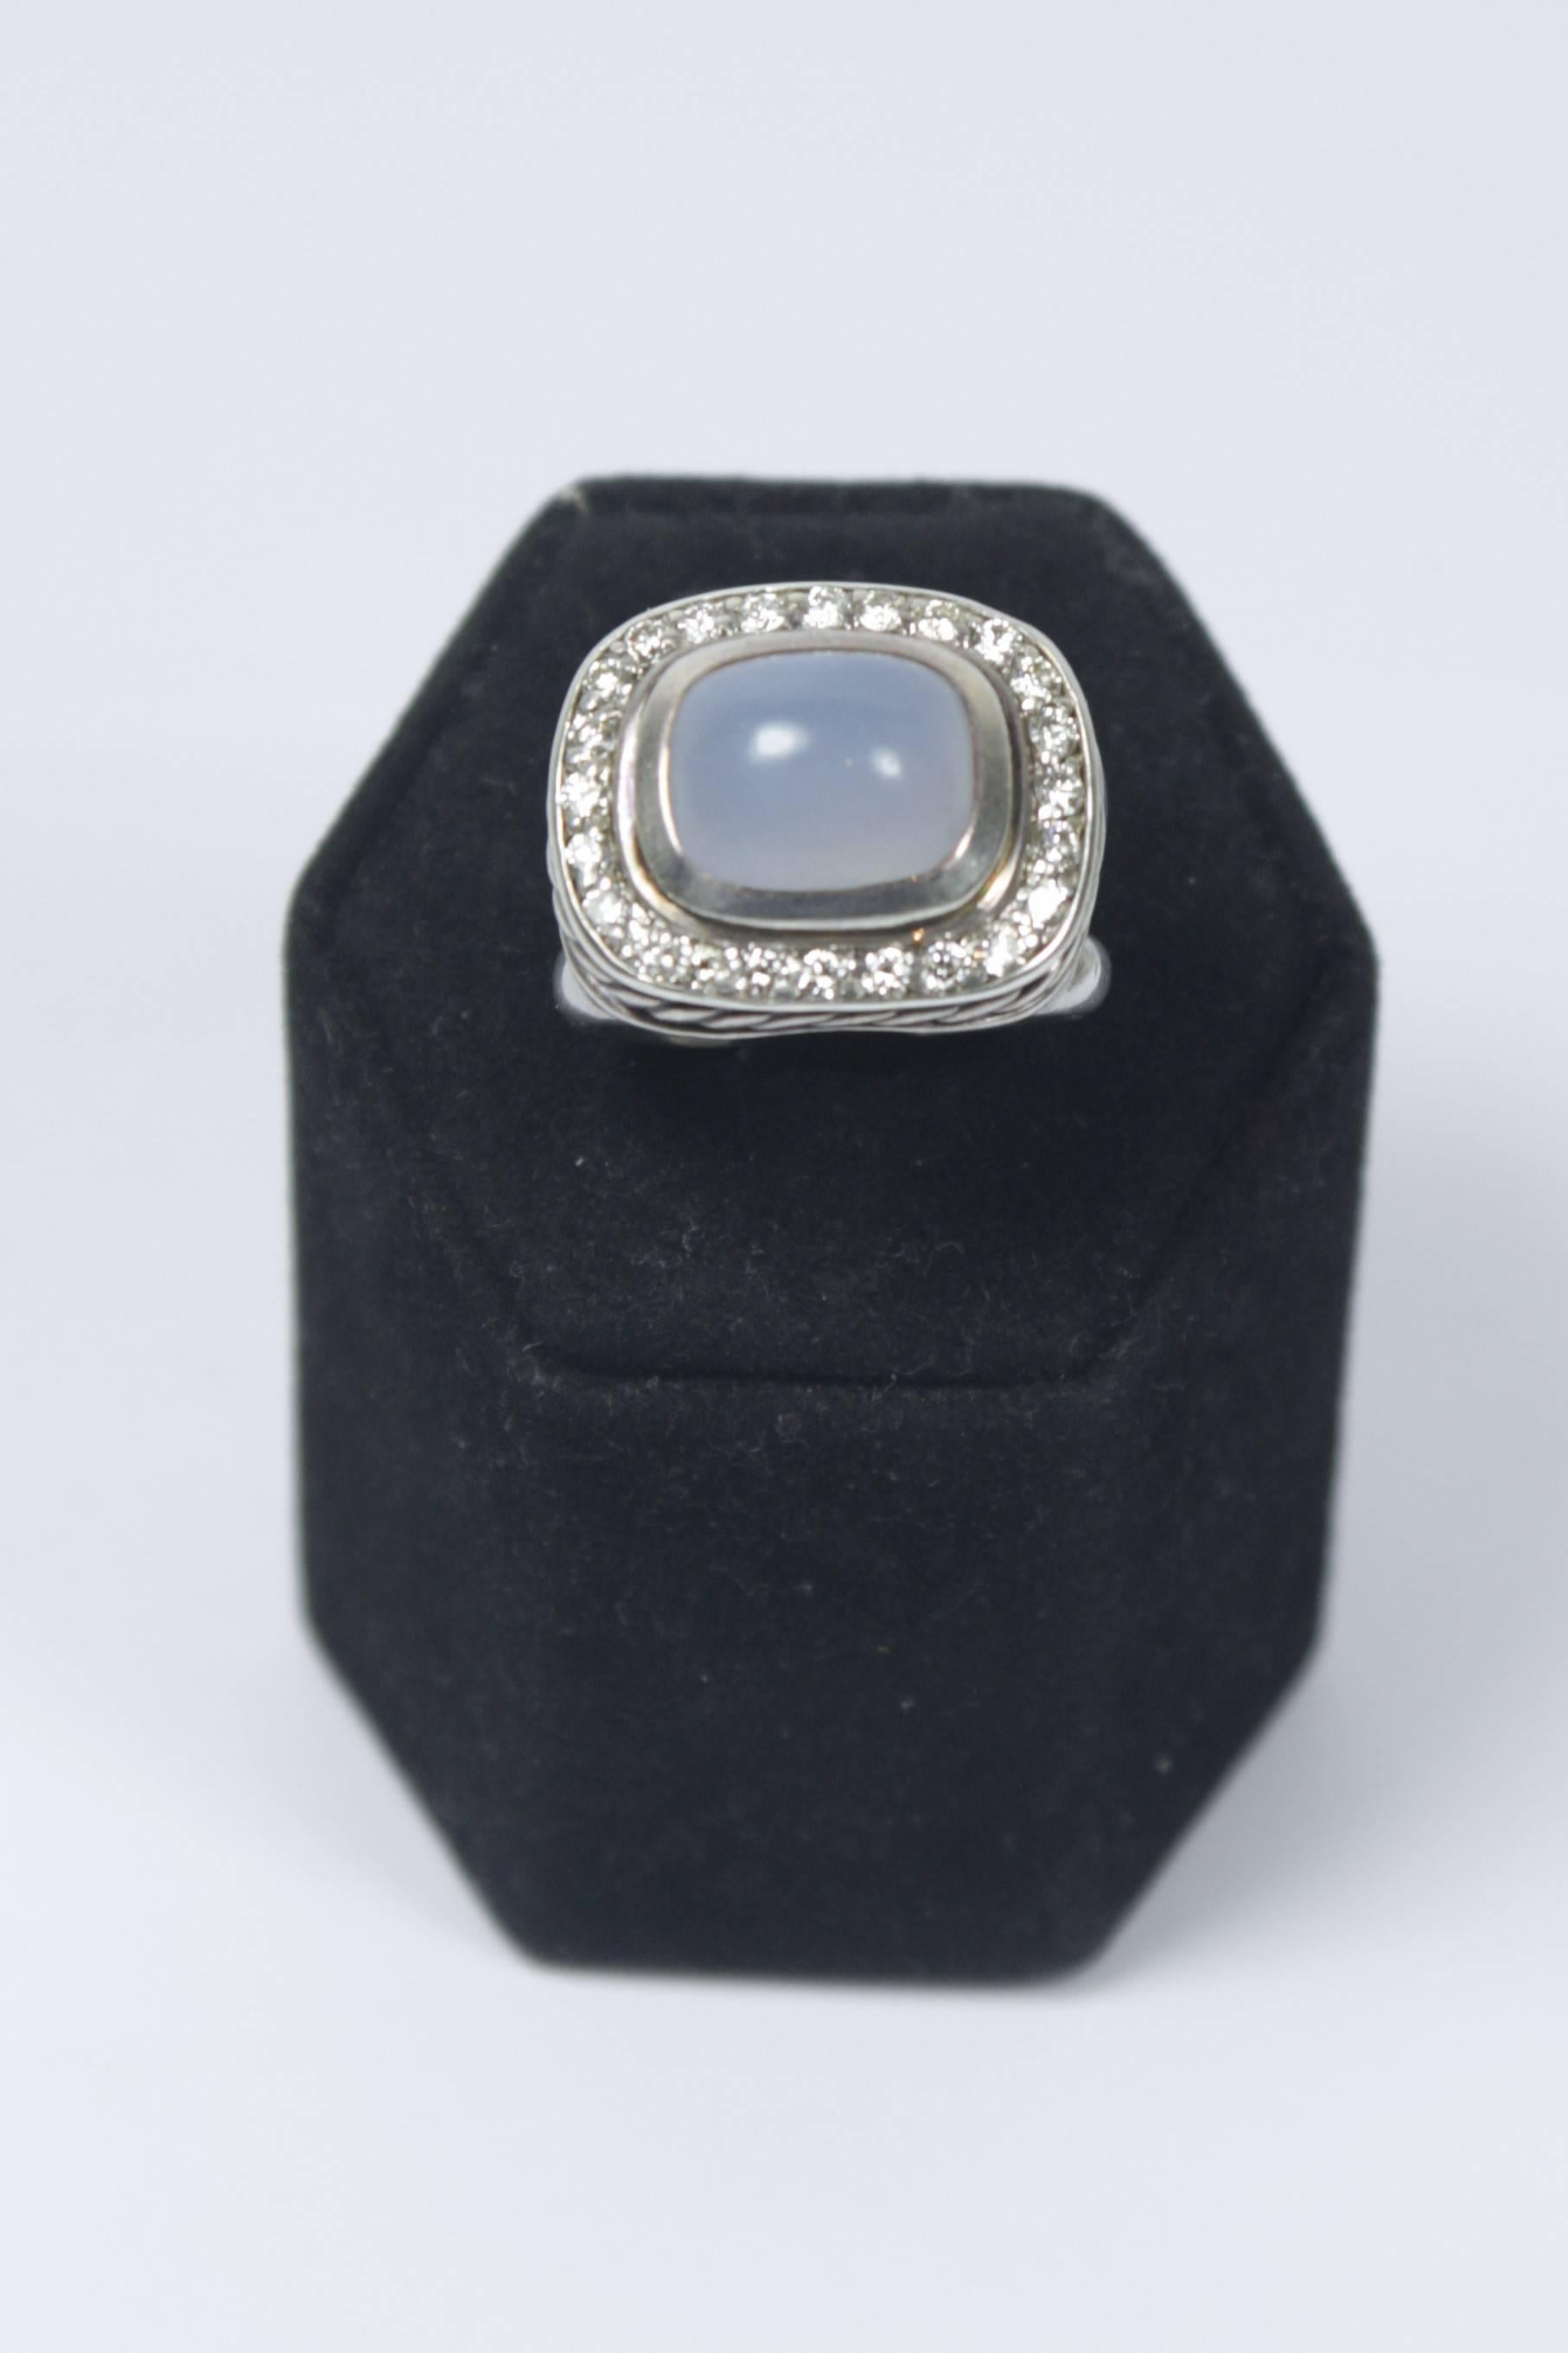 This David Yurman ring is composed of sterling silver with pave diamonds and features a cabochon moonstone (approximately 4 carats total weight). In excellent condition.

Specs: 
Sterling Silver 
Cabochon Moonstone
Pave Diamonds
Size: 7.5